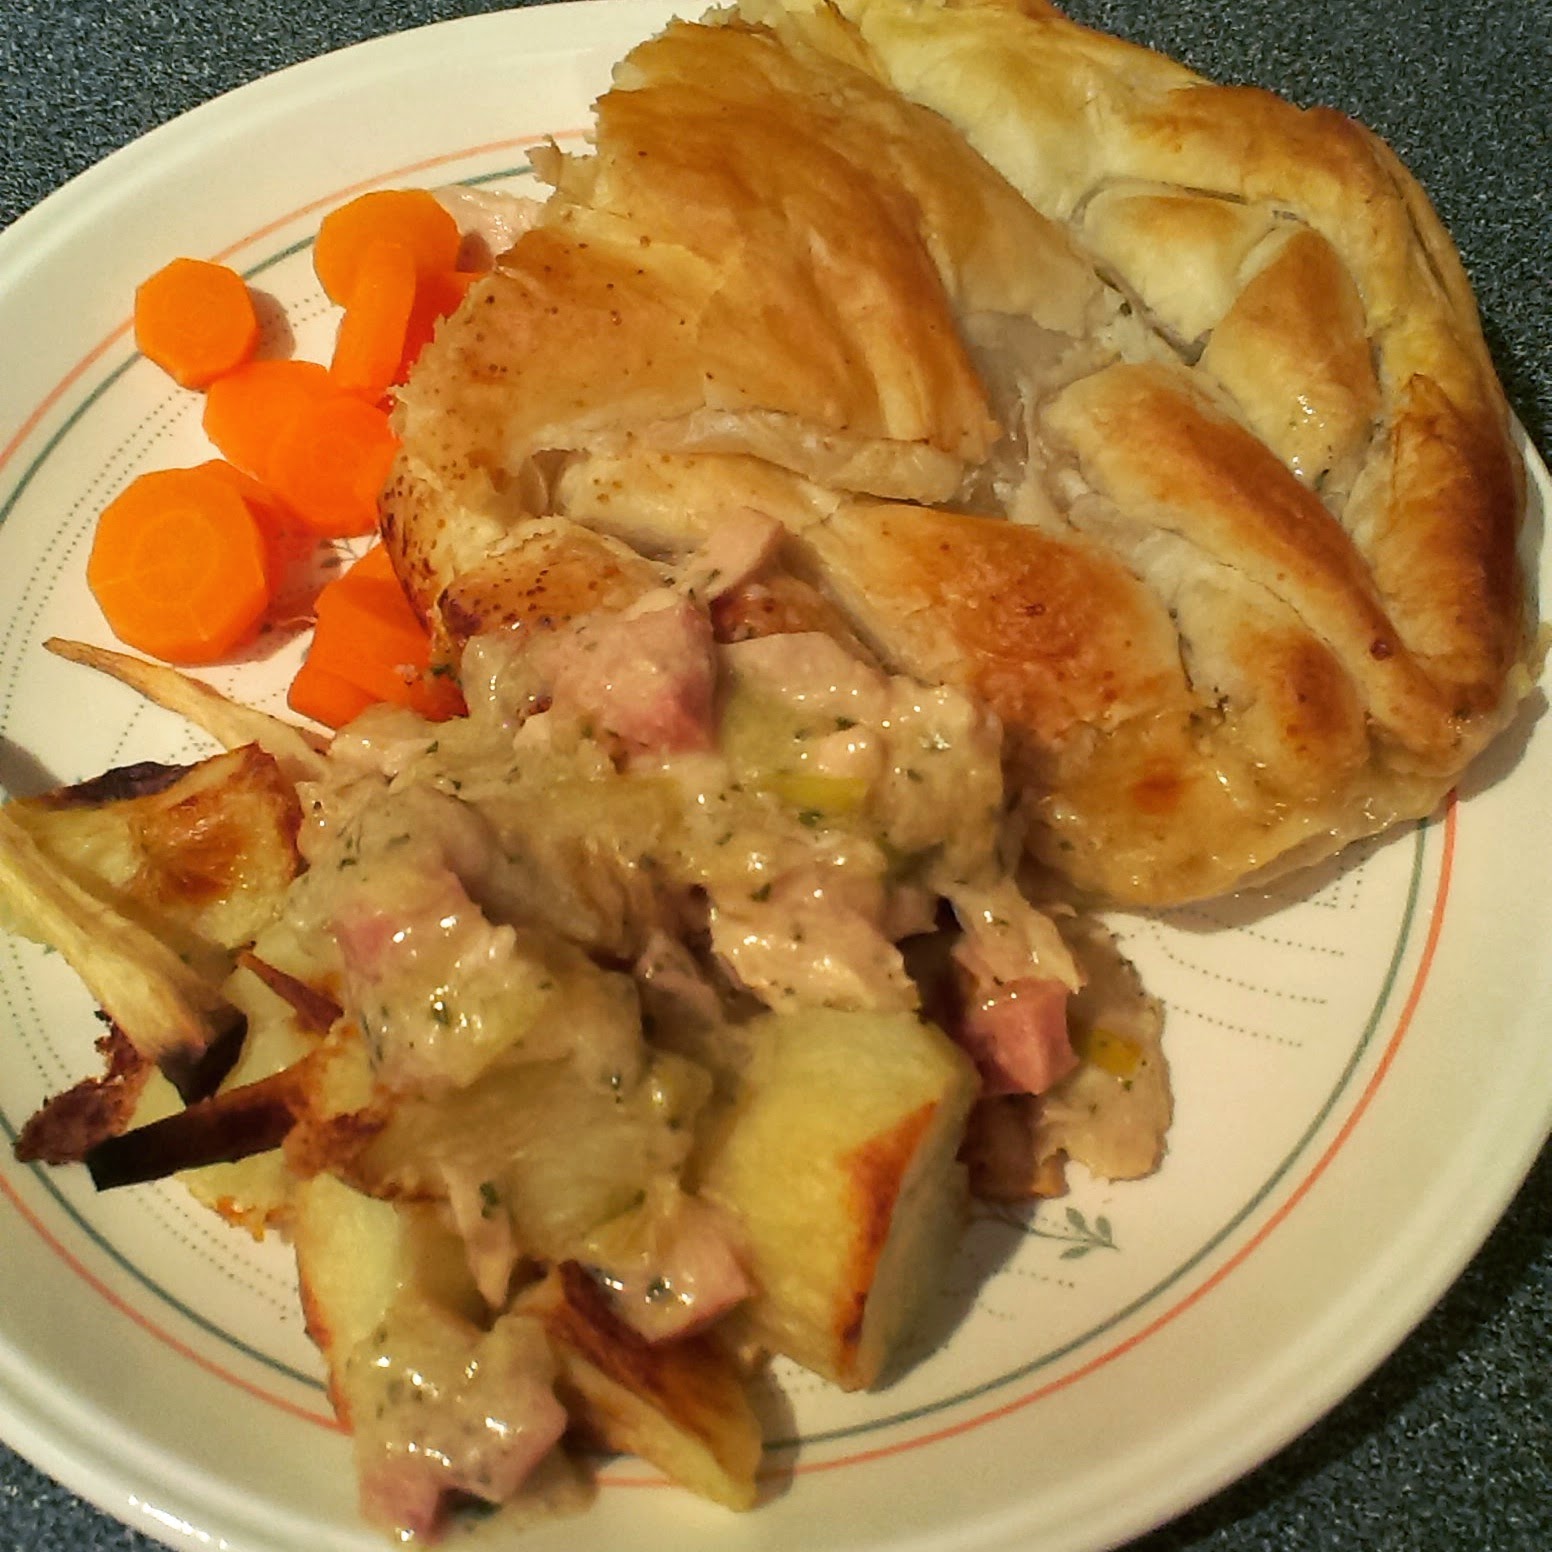 8pm - Turkey and Gammon Pie for dinner